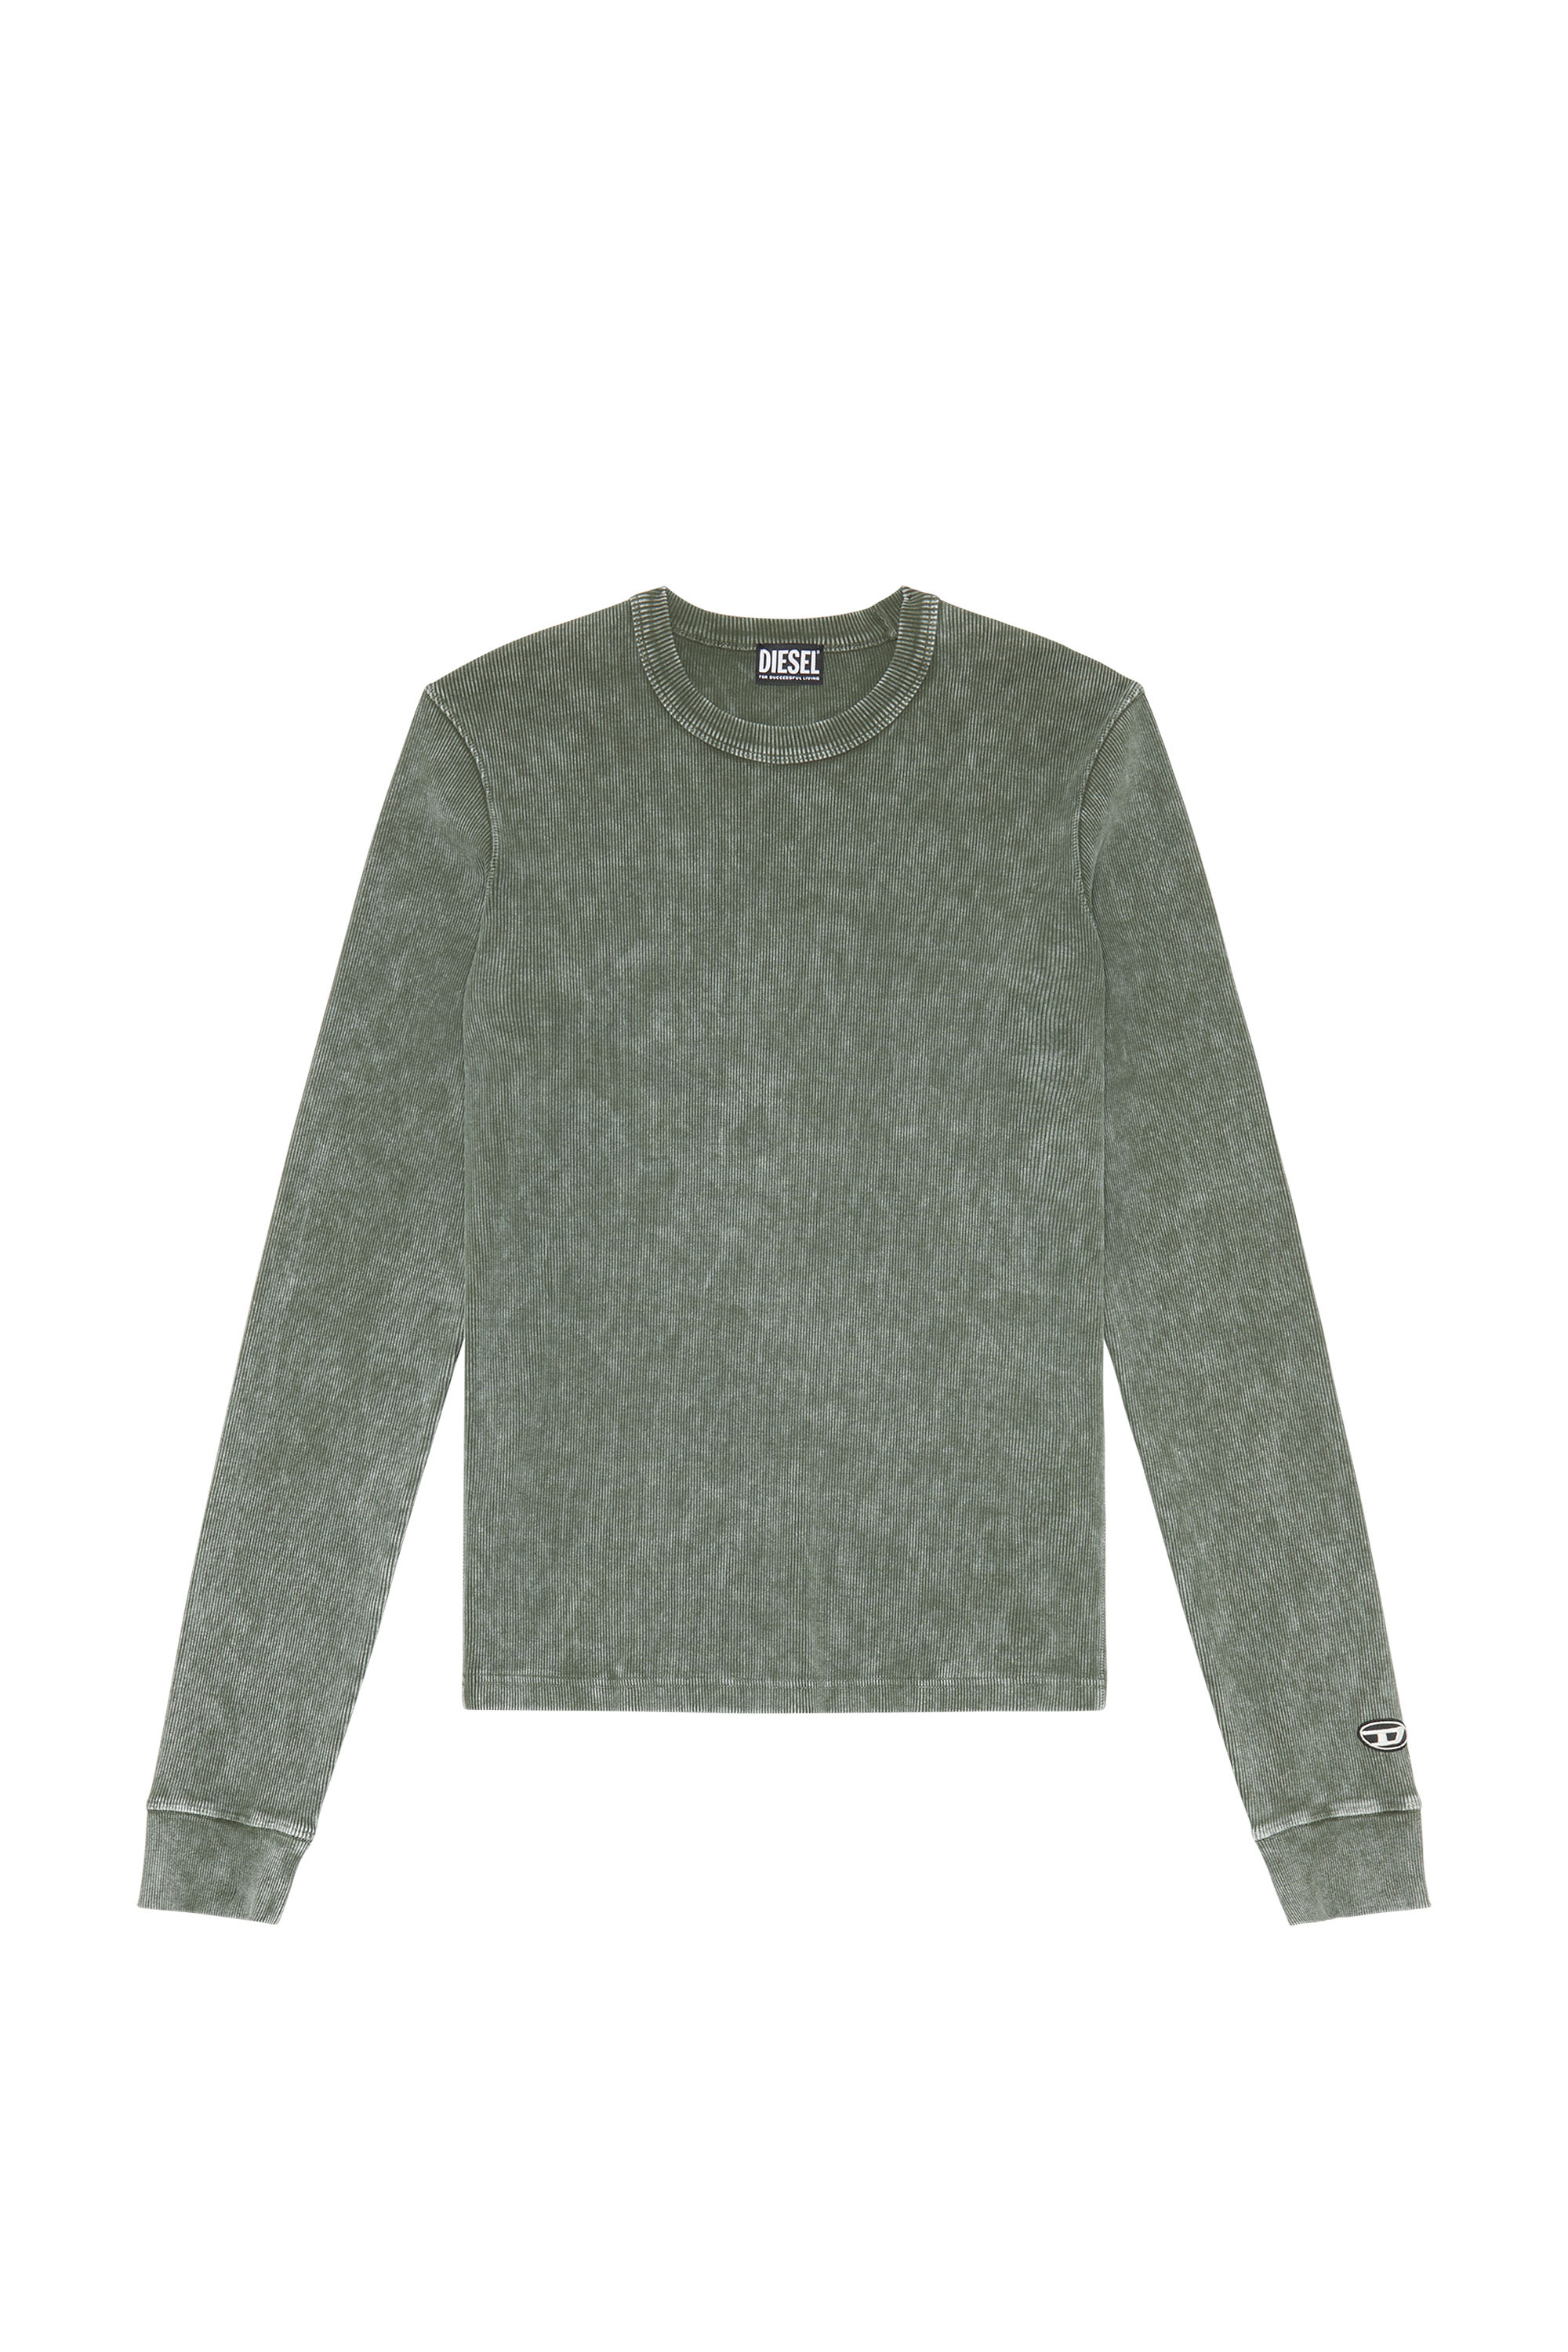 T-RIBBER, Olive Green - T-Shirts